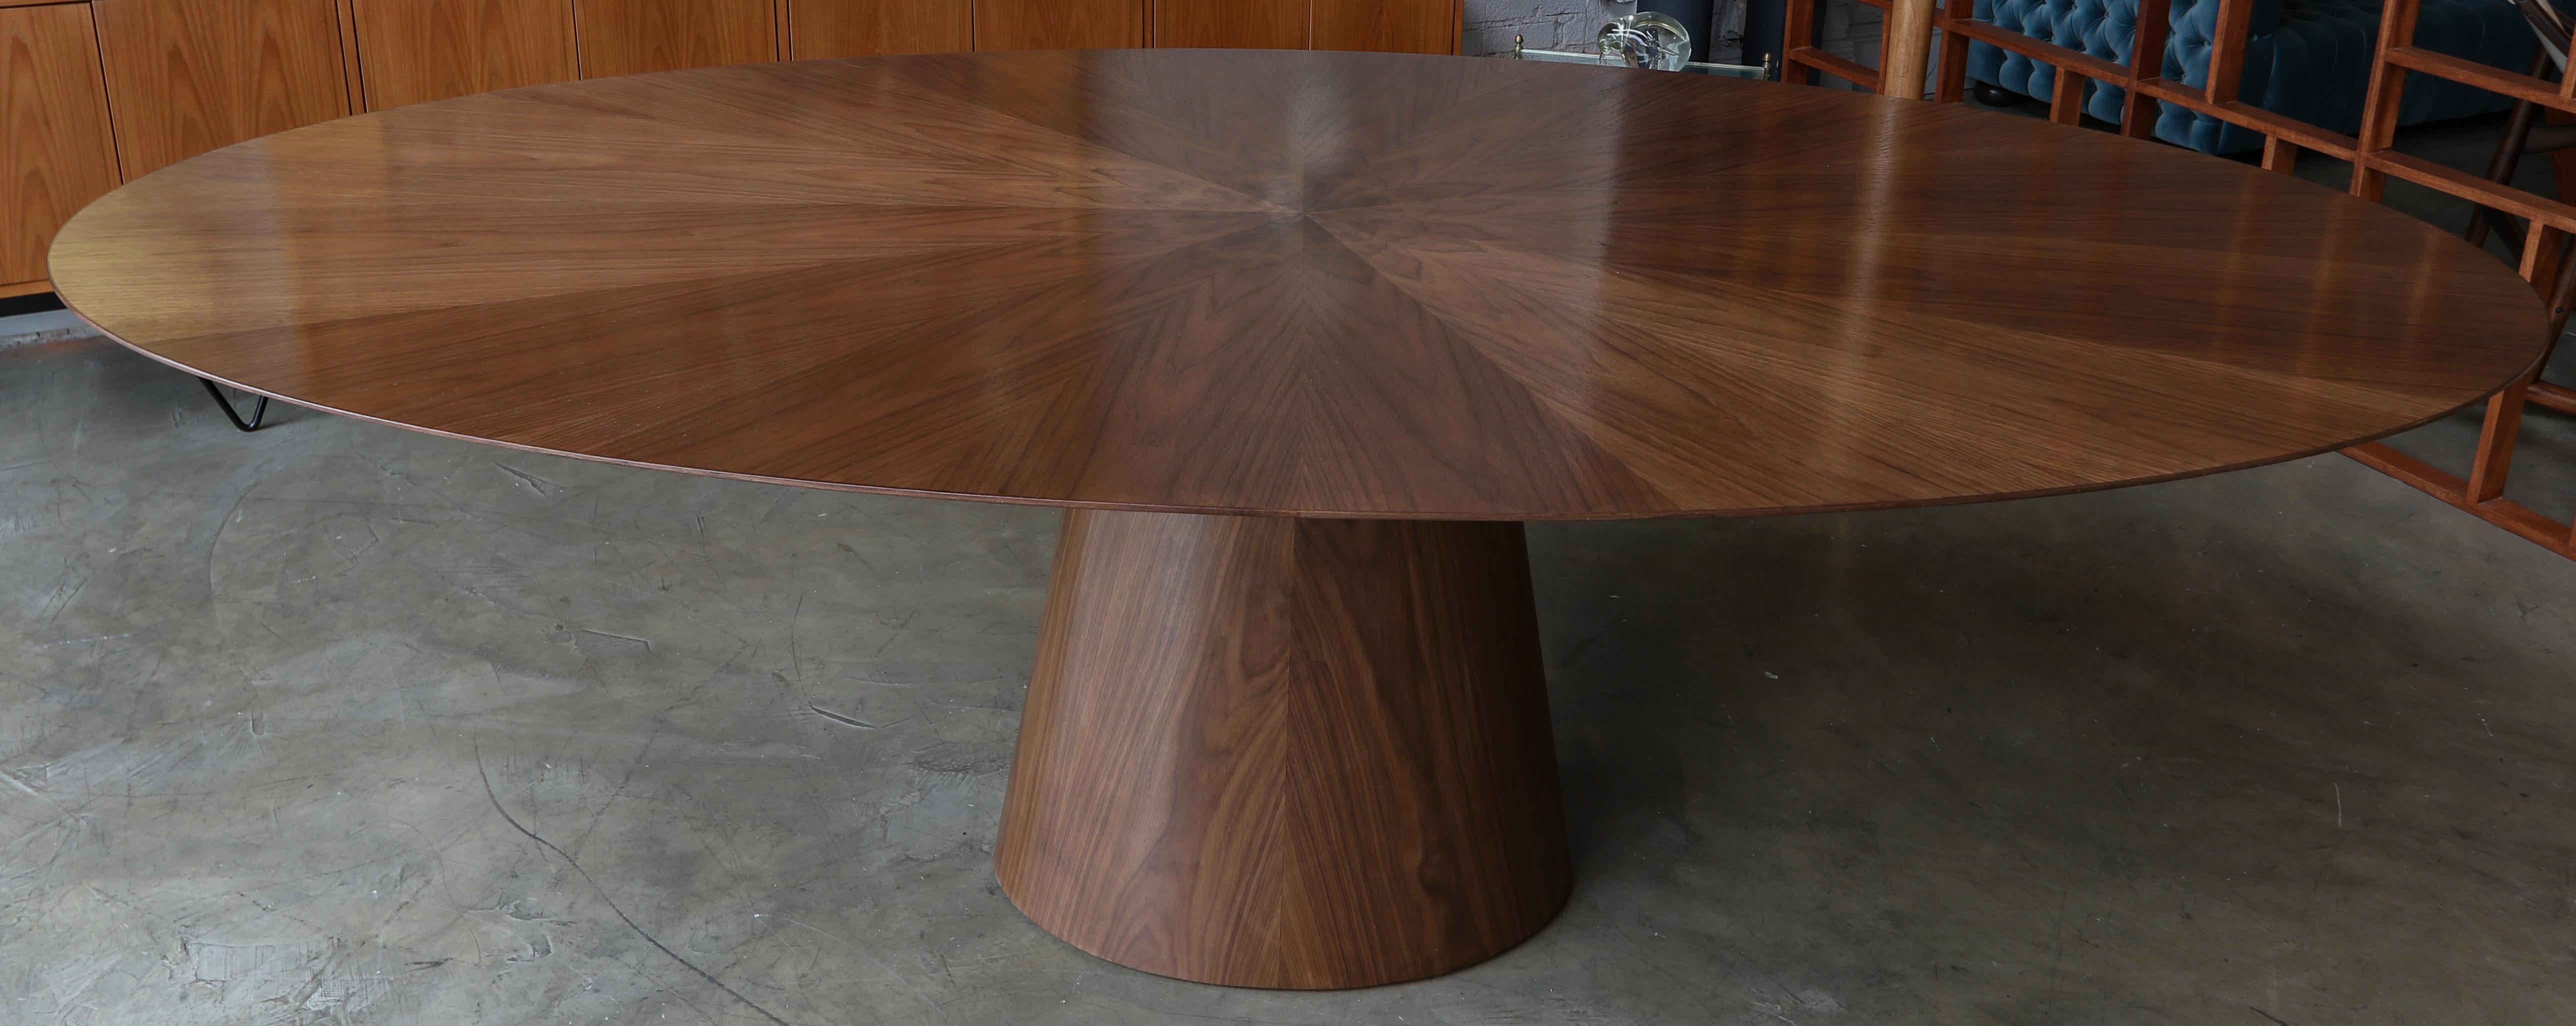 Custom oval dining table with pedestal leg made in American walnut with flower detail in center of top.  Made in Los Angeles by Adesso Imports.

Can be done in different woods, finishes and sizes.